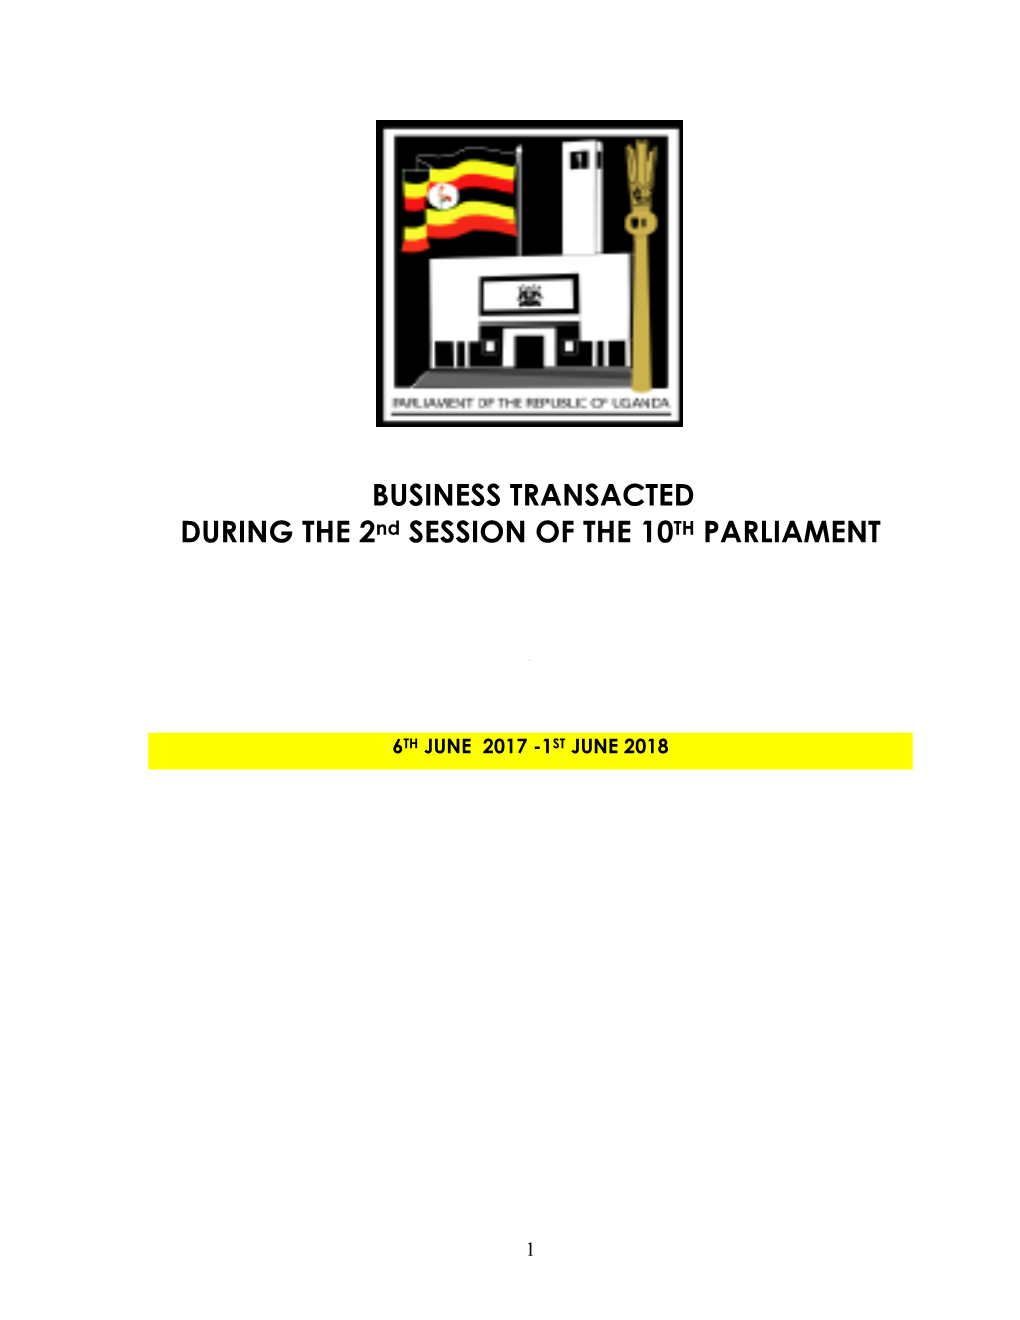 BUSINESS TRANSACTED DURING the 2Nd SESSION of the 10TH PARLIAMENT